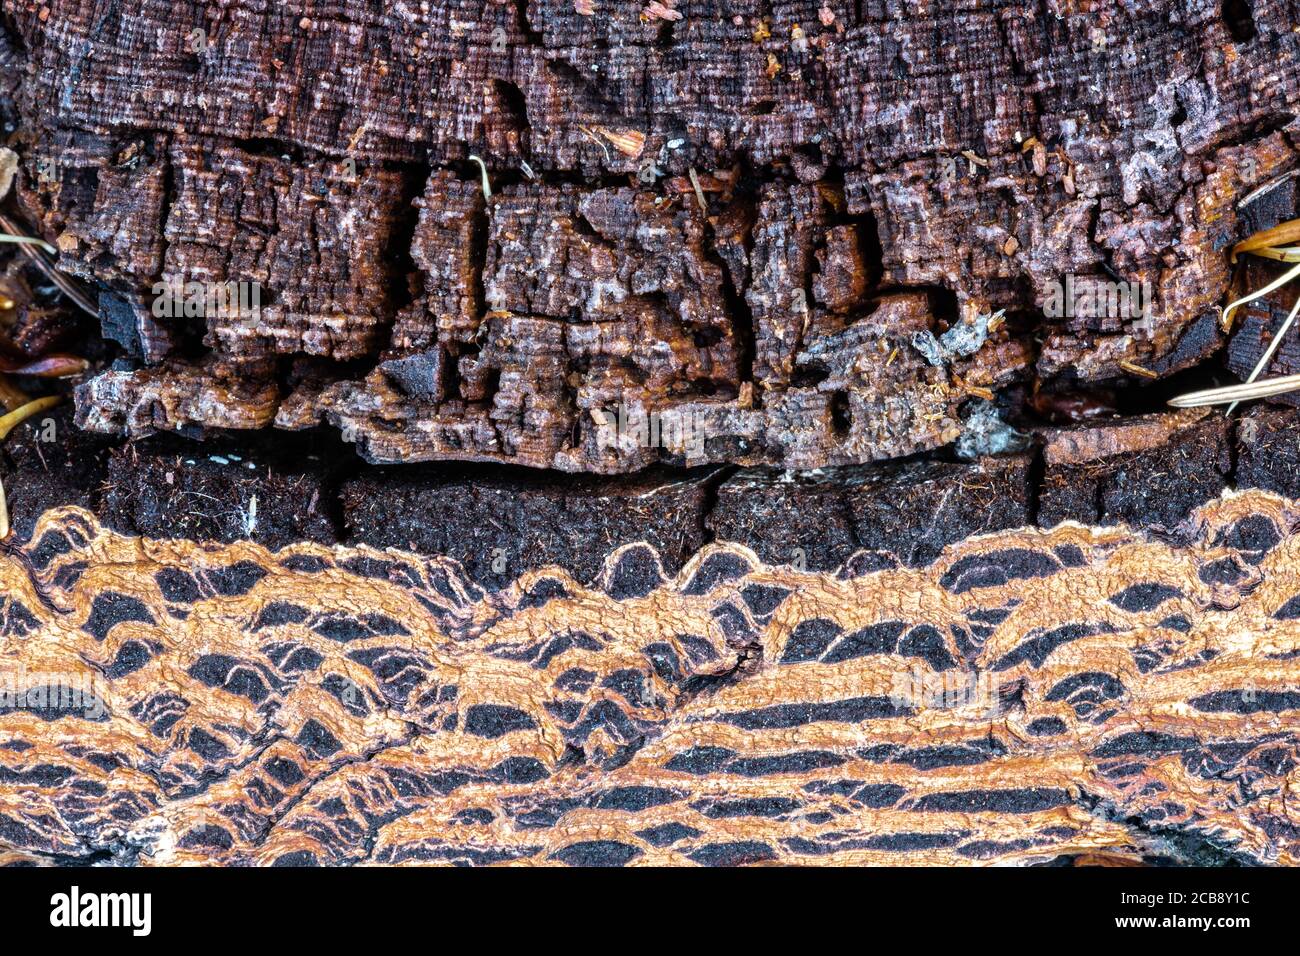 Cross Cut of a Tree Trunk with Old Phloem and Xylem Stock Photo